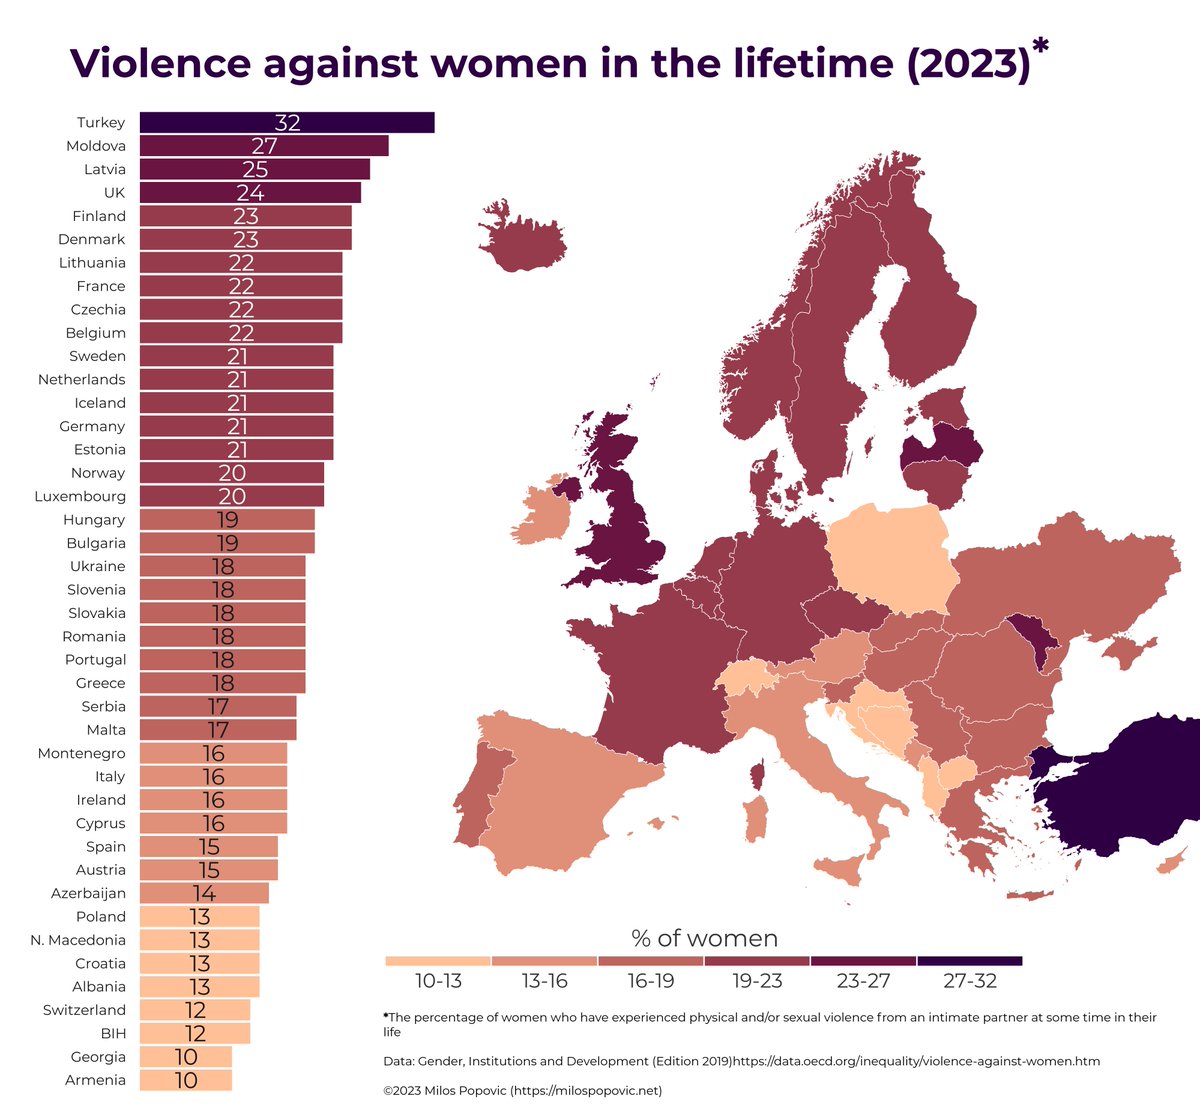 Today is #EndViolenceAgainstWomen Day and my map exposes the shocking data about violence against women in Europe 😱 We need to end this human rights violation now 💜 Want to know how I make maps like this? Watch my tutorial 👇 🔗youtu.be/p2YwfIreSoA